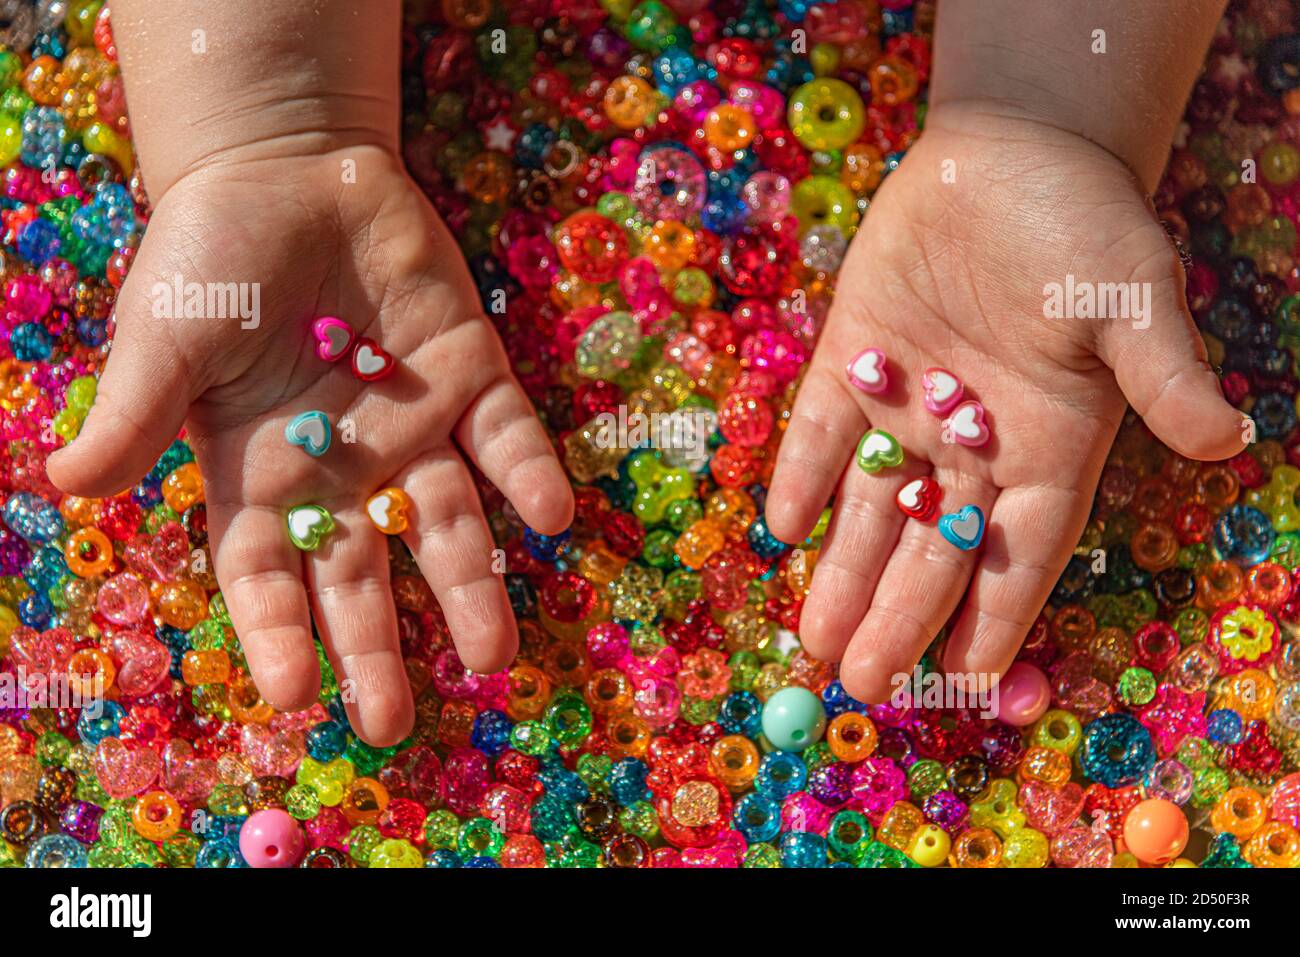 Colored beads in child's palms. A very colorful background of